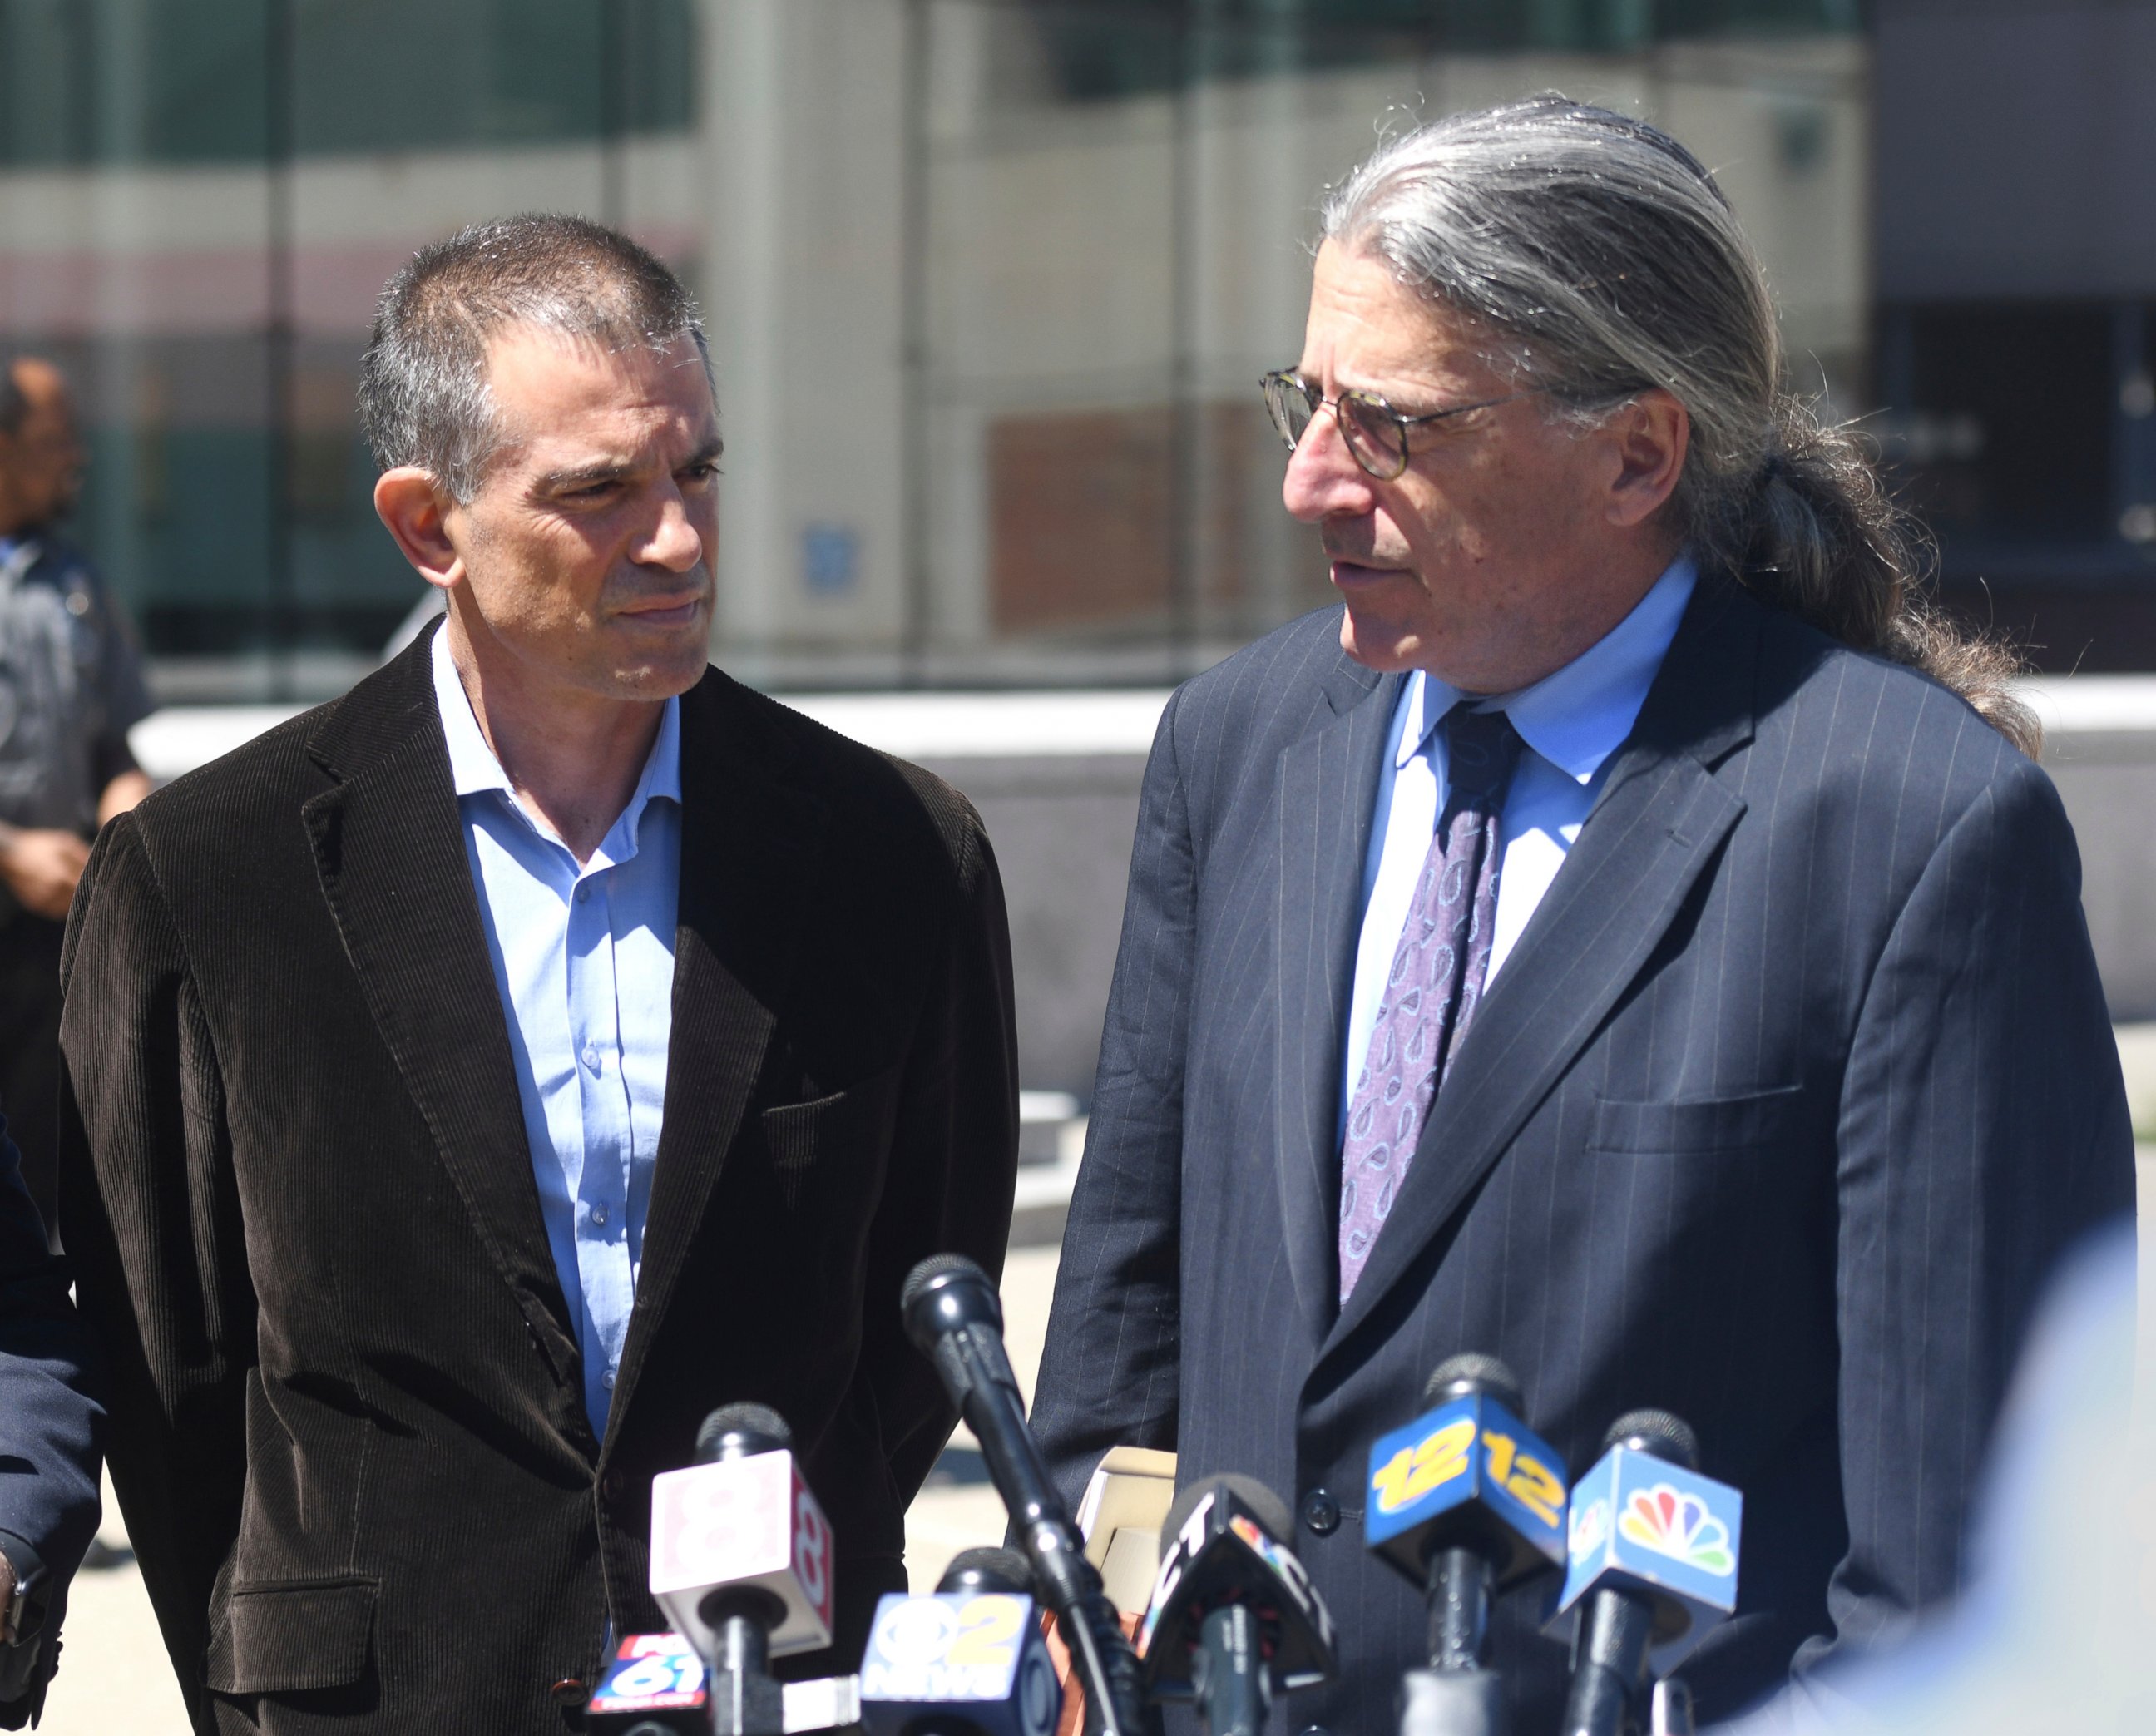 PHOTO: Fotis Dulos, left, is accompanied by his attorney Norm Pattis, after making an appearance at Connecticut Superior Court in Stamford, Conn. Wednesday, June 26, 2019.